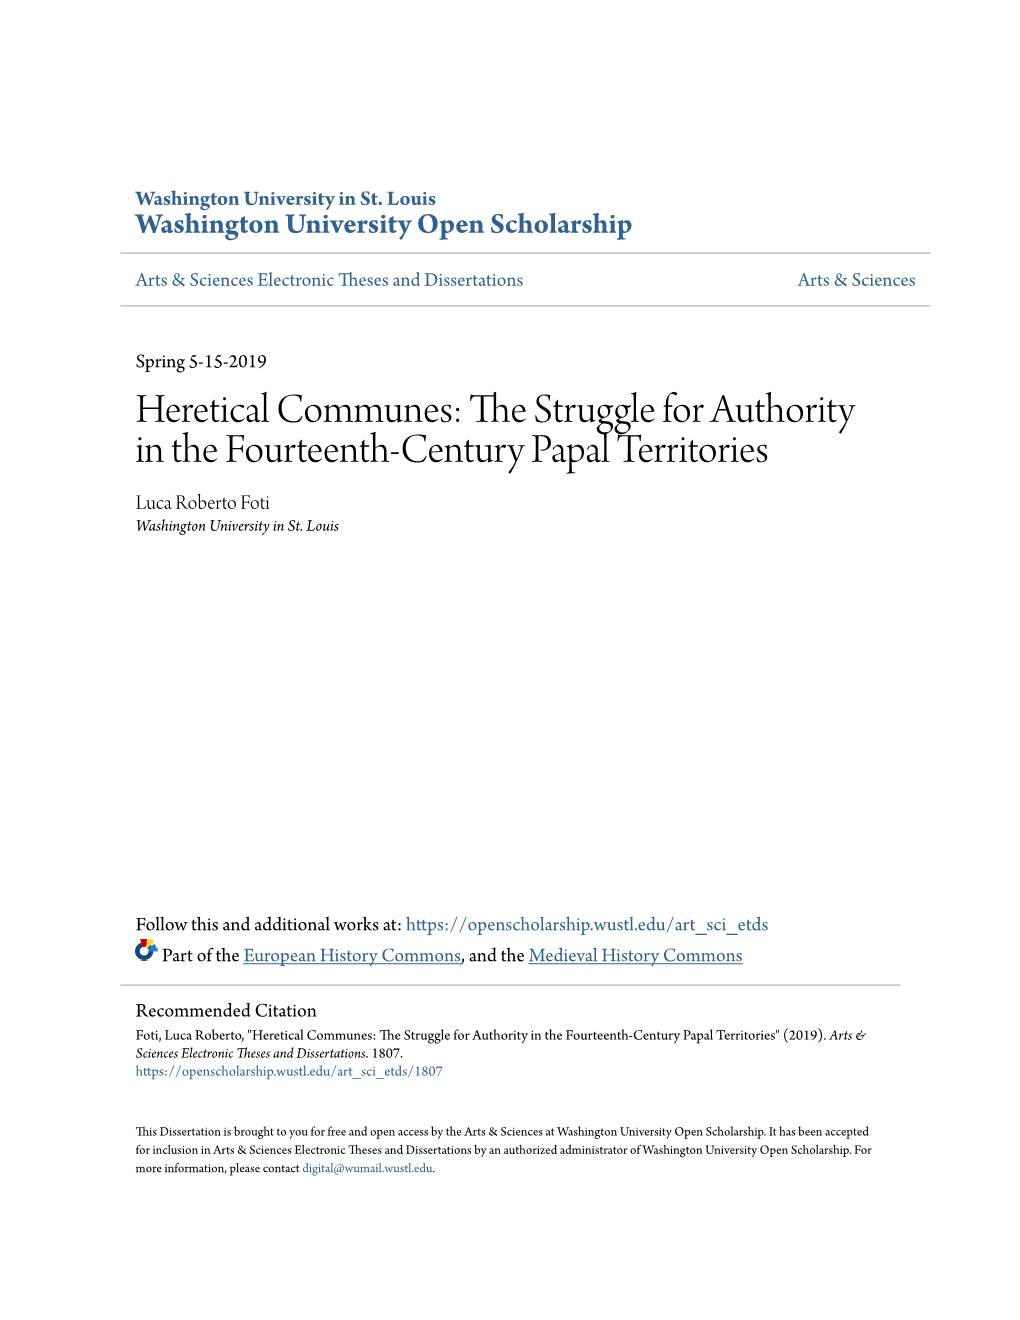 The Struggle for Authority in the Fourteenth-Century Papal Territories by Luca Roberto Foti